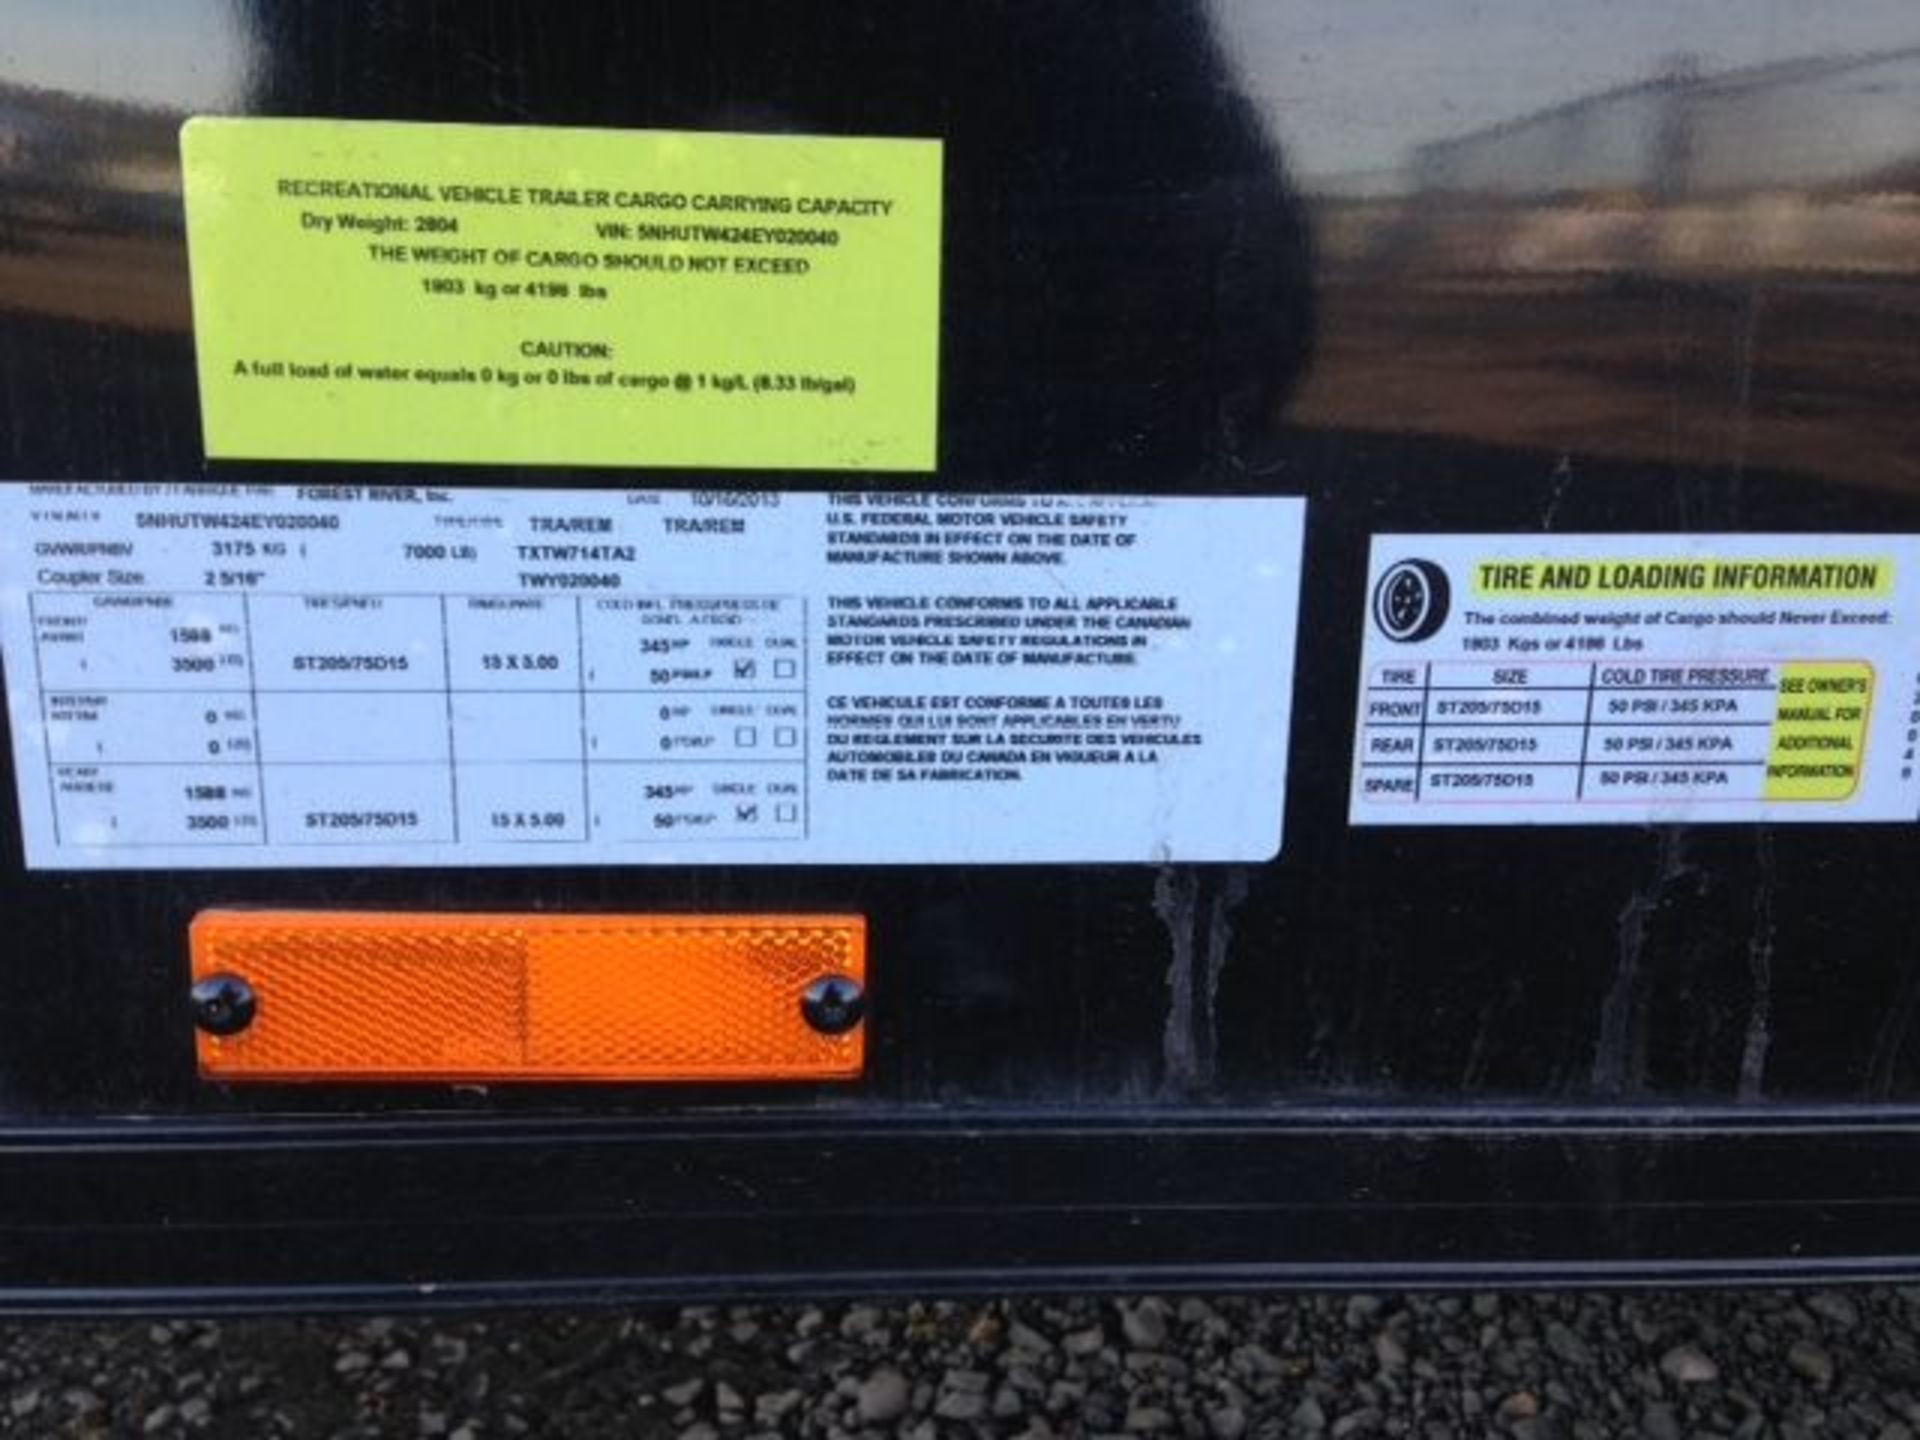 2014 CONTINENTAL CARGO - chassis number SNHUTW424EY020040, offered with the Certificate of Origin, - Image 7 of 7